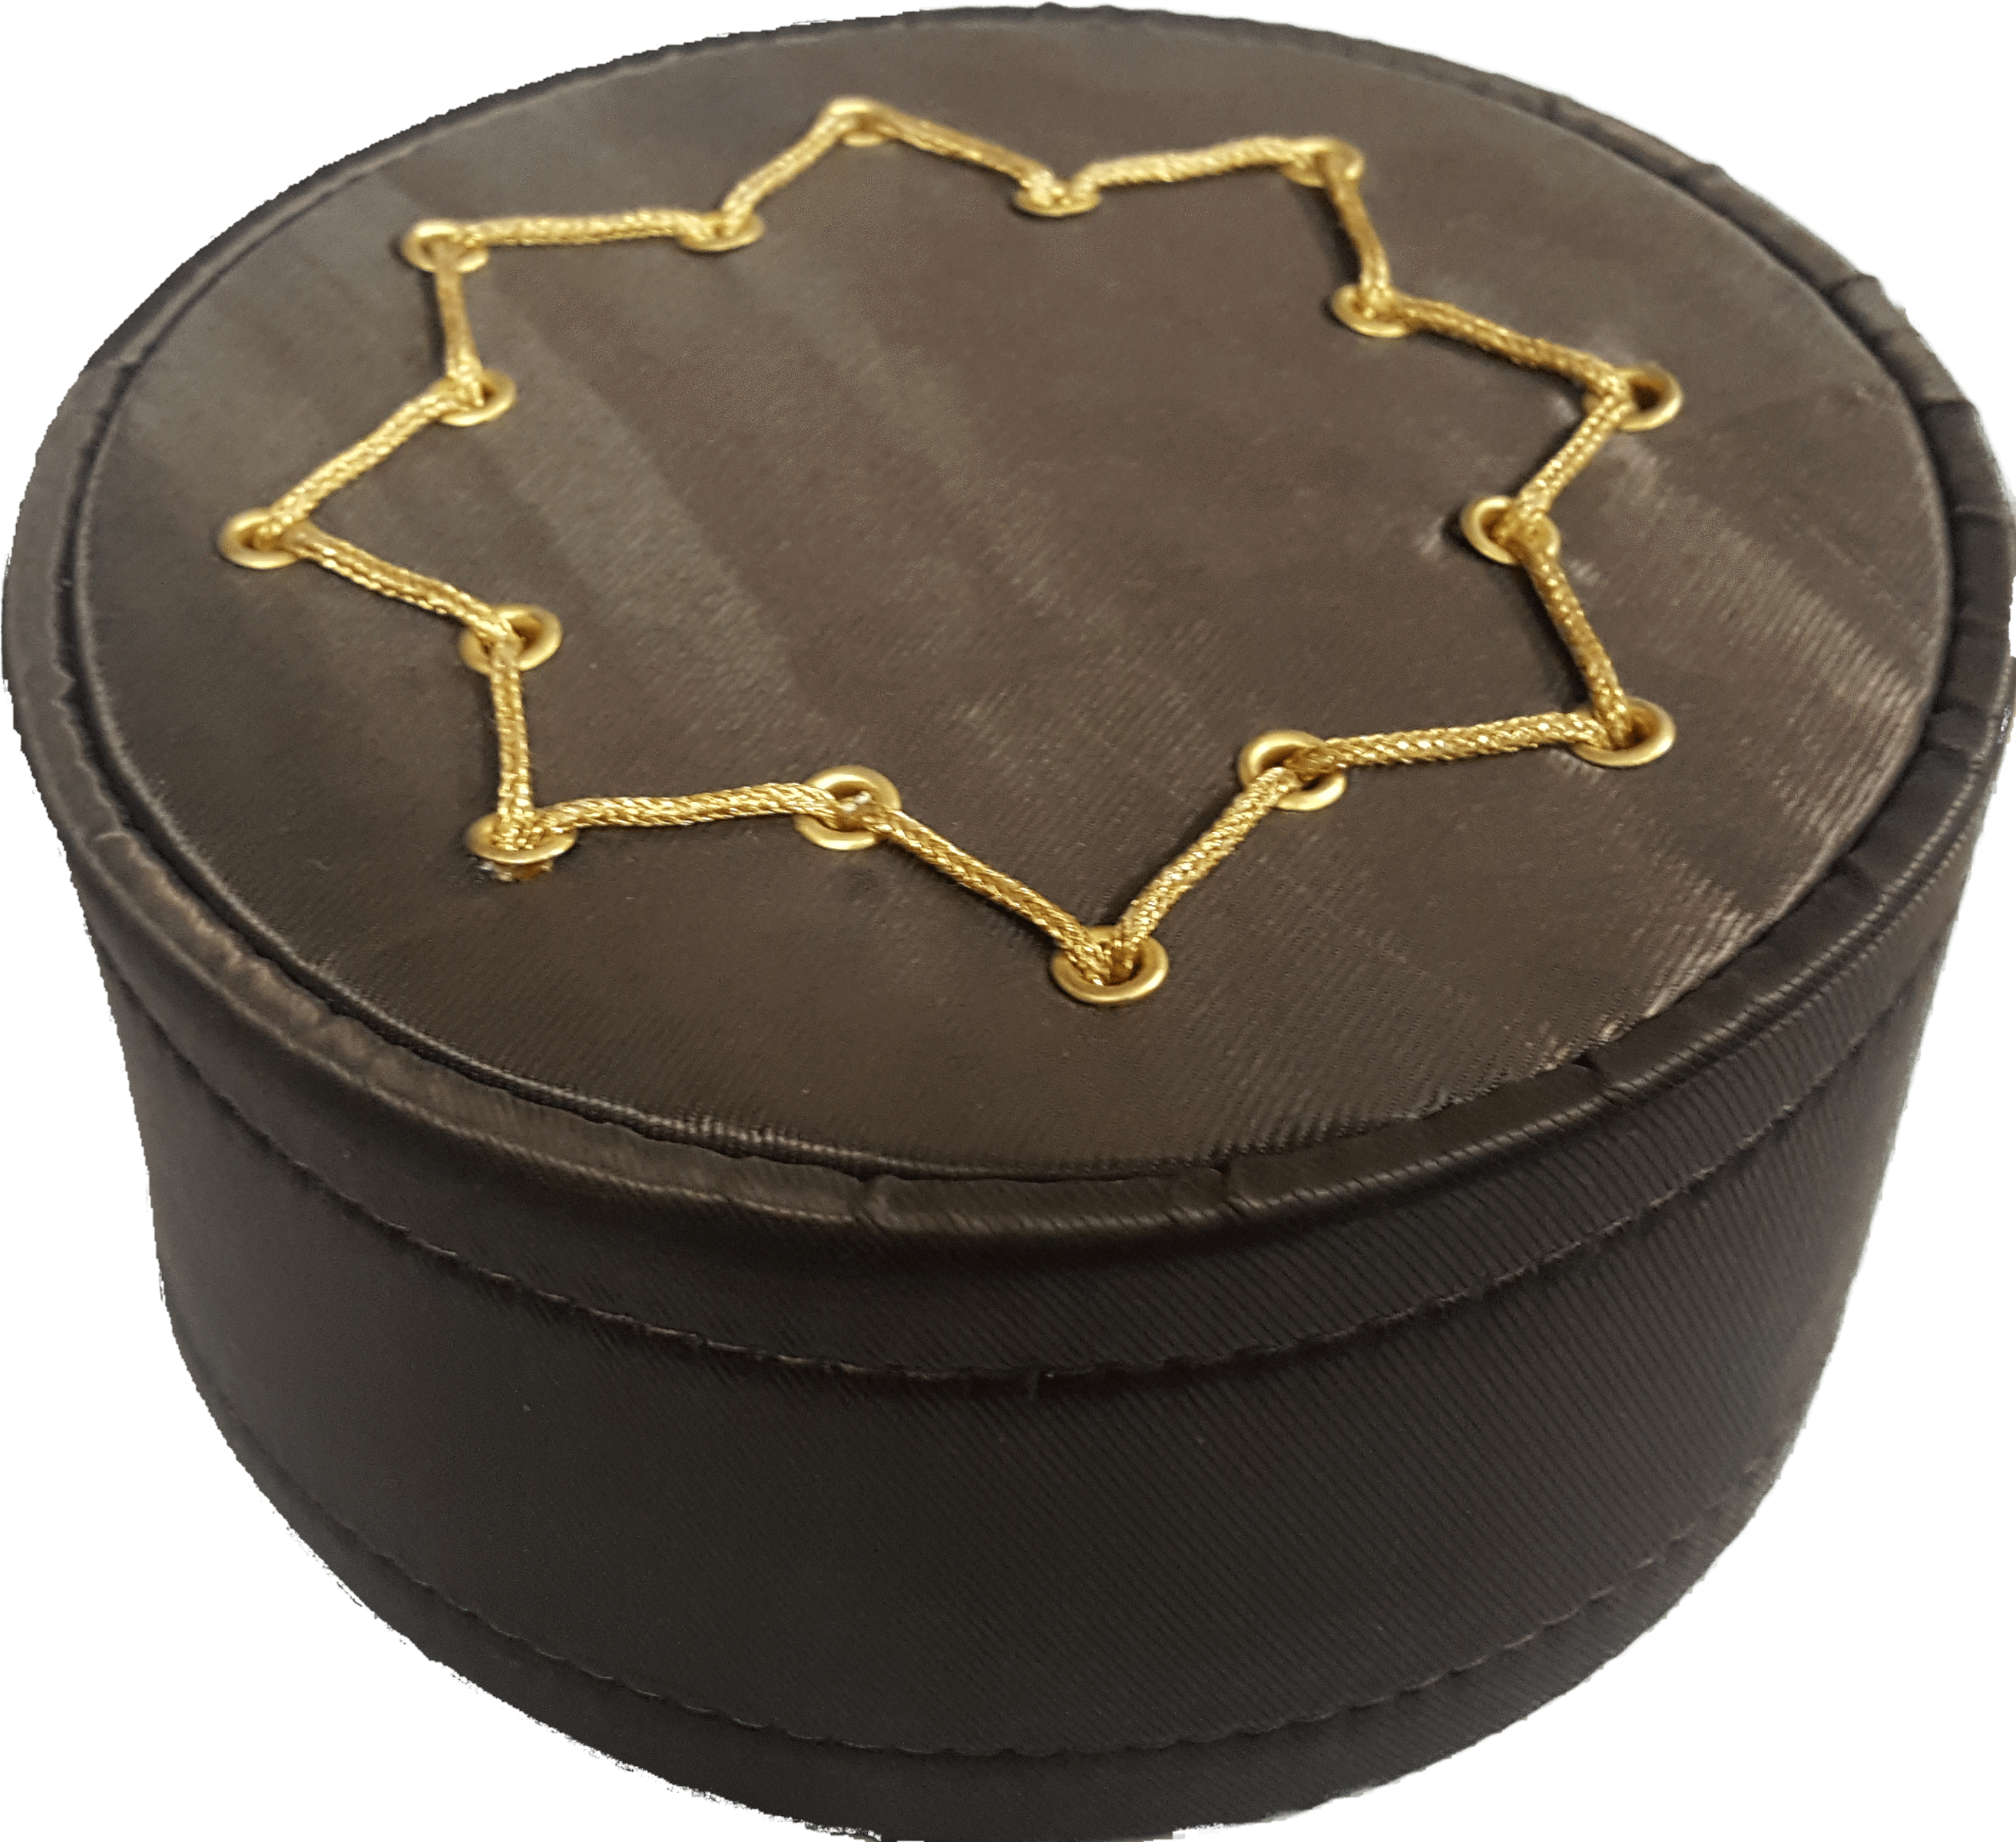 A Round Box With A Gold Star Design